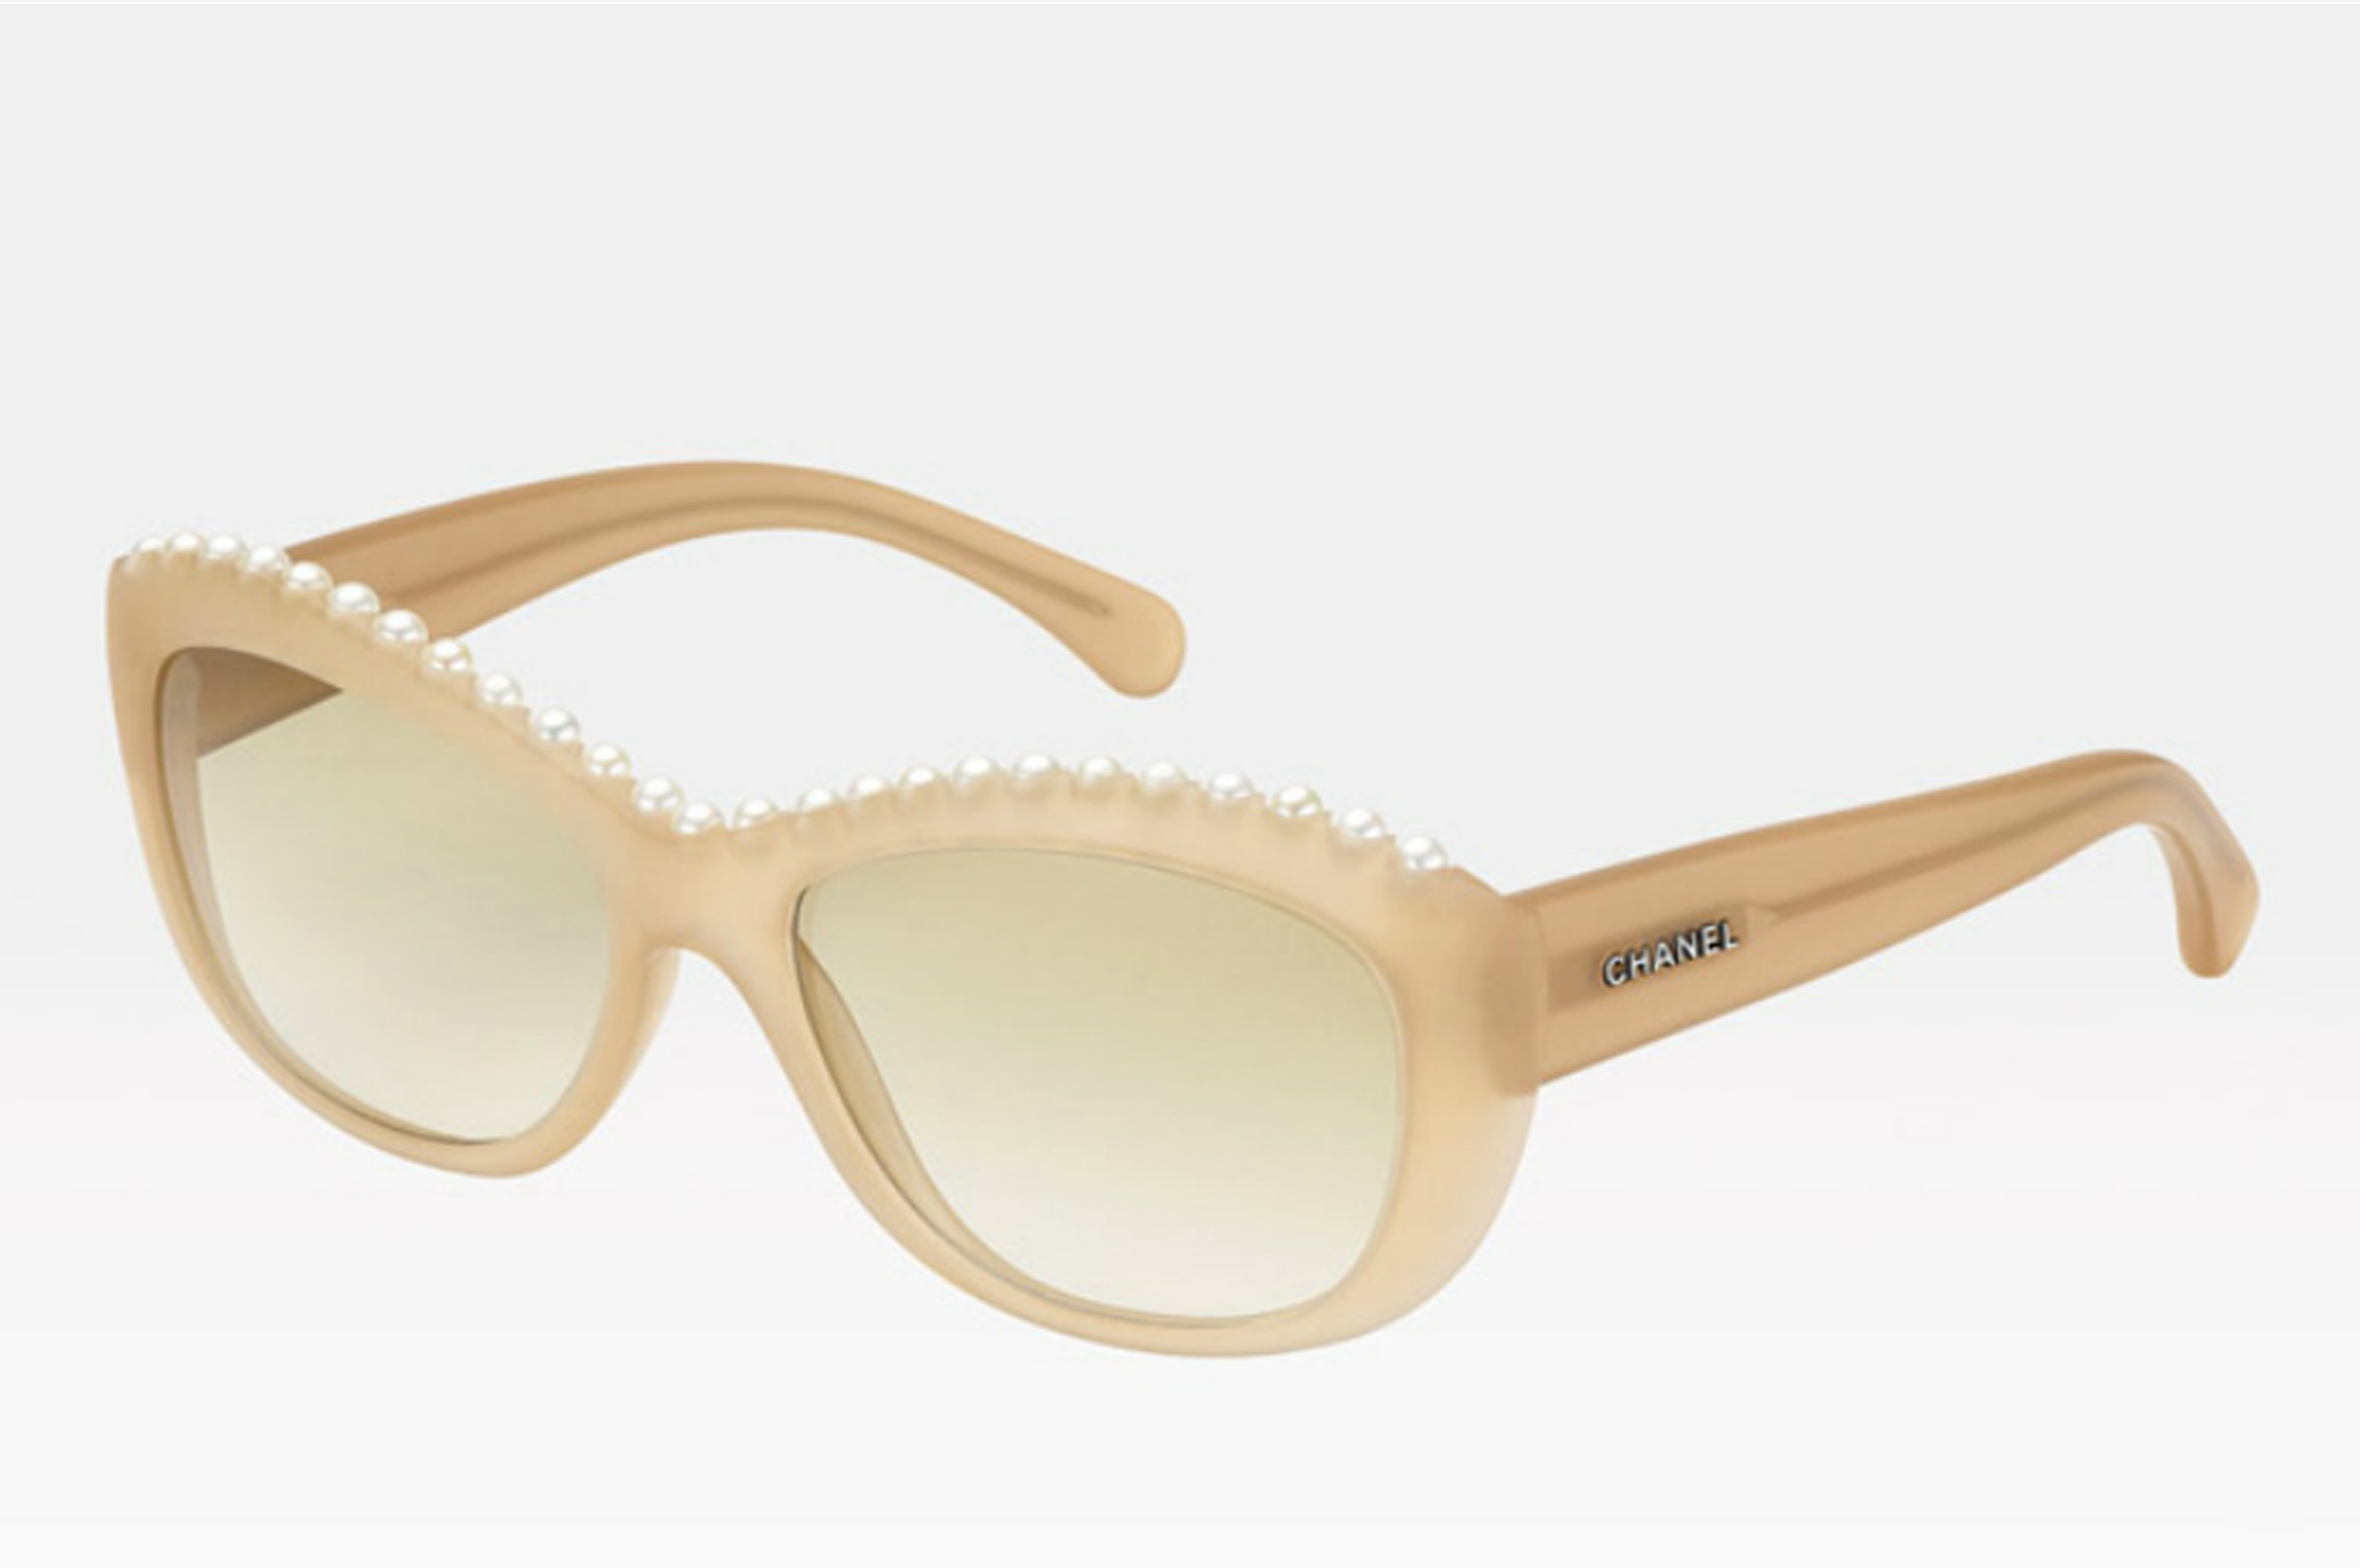 CHANEL model A 40942 S0133 – “the oyster” – ss12